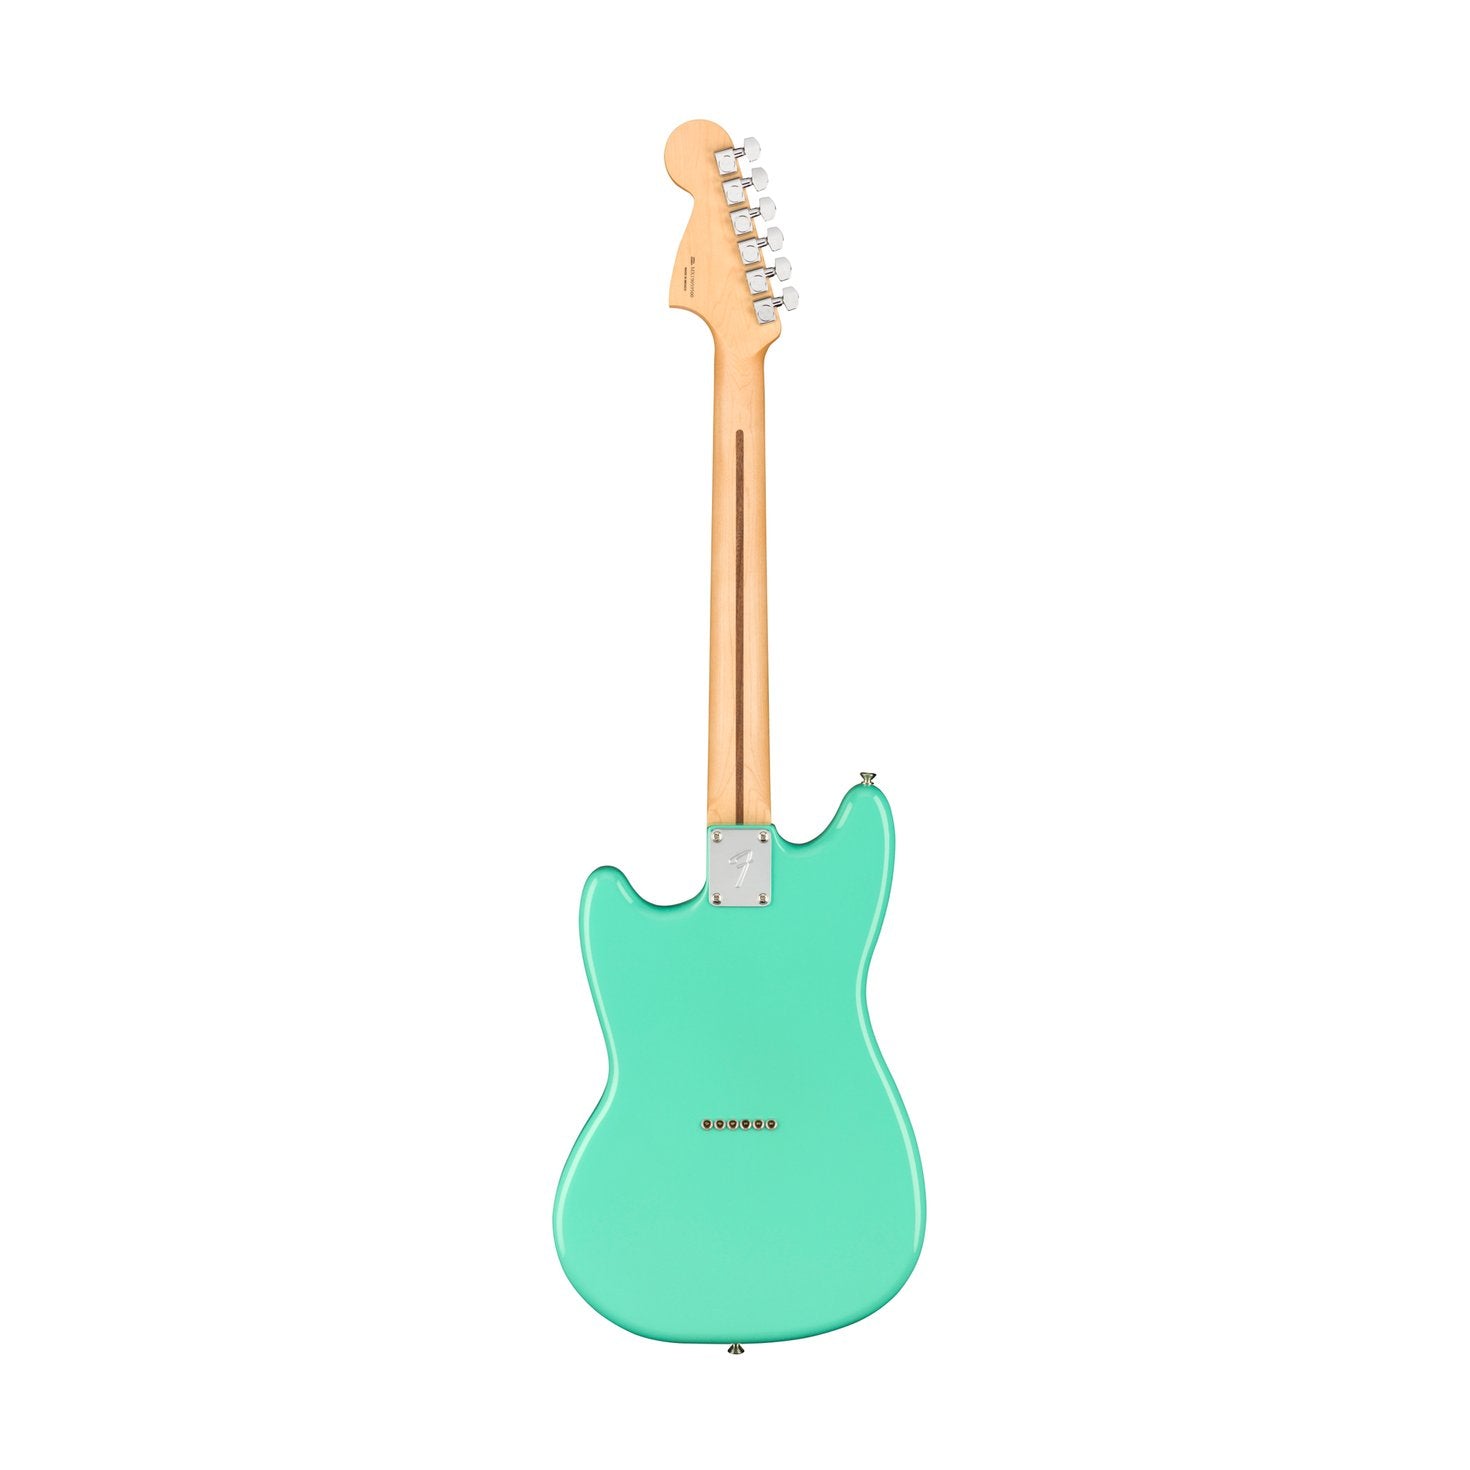 Fender Player Mustang 90 Electric Guitar, Maple FB, Seafoam Green, FENDER, ELECTRIC GUITAR, fender-eletric-guitar-f03-014-4142-573, ZOSO MUSIC SDN BHD